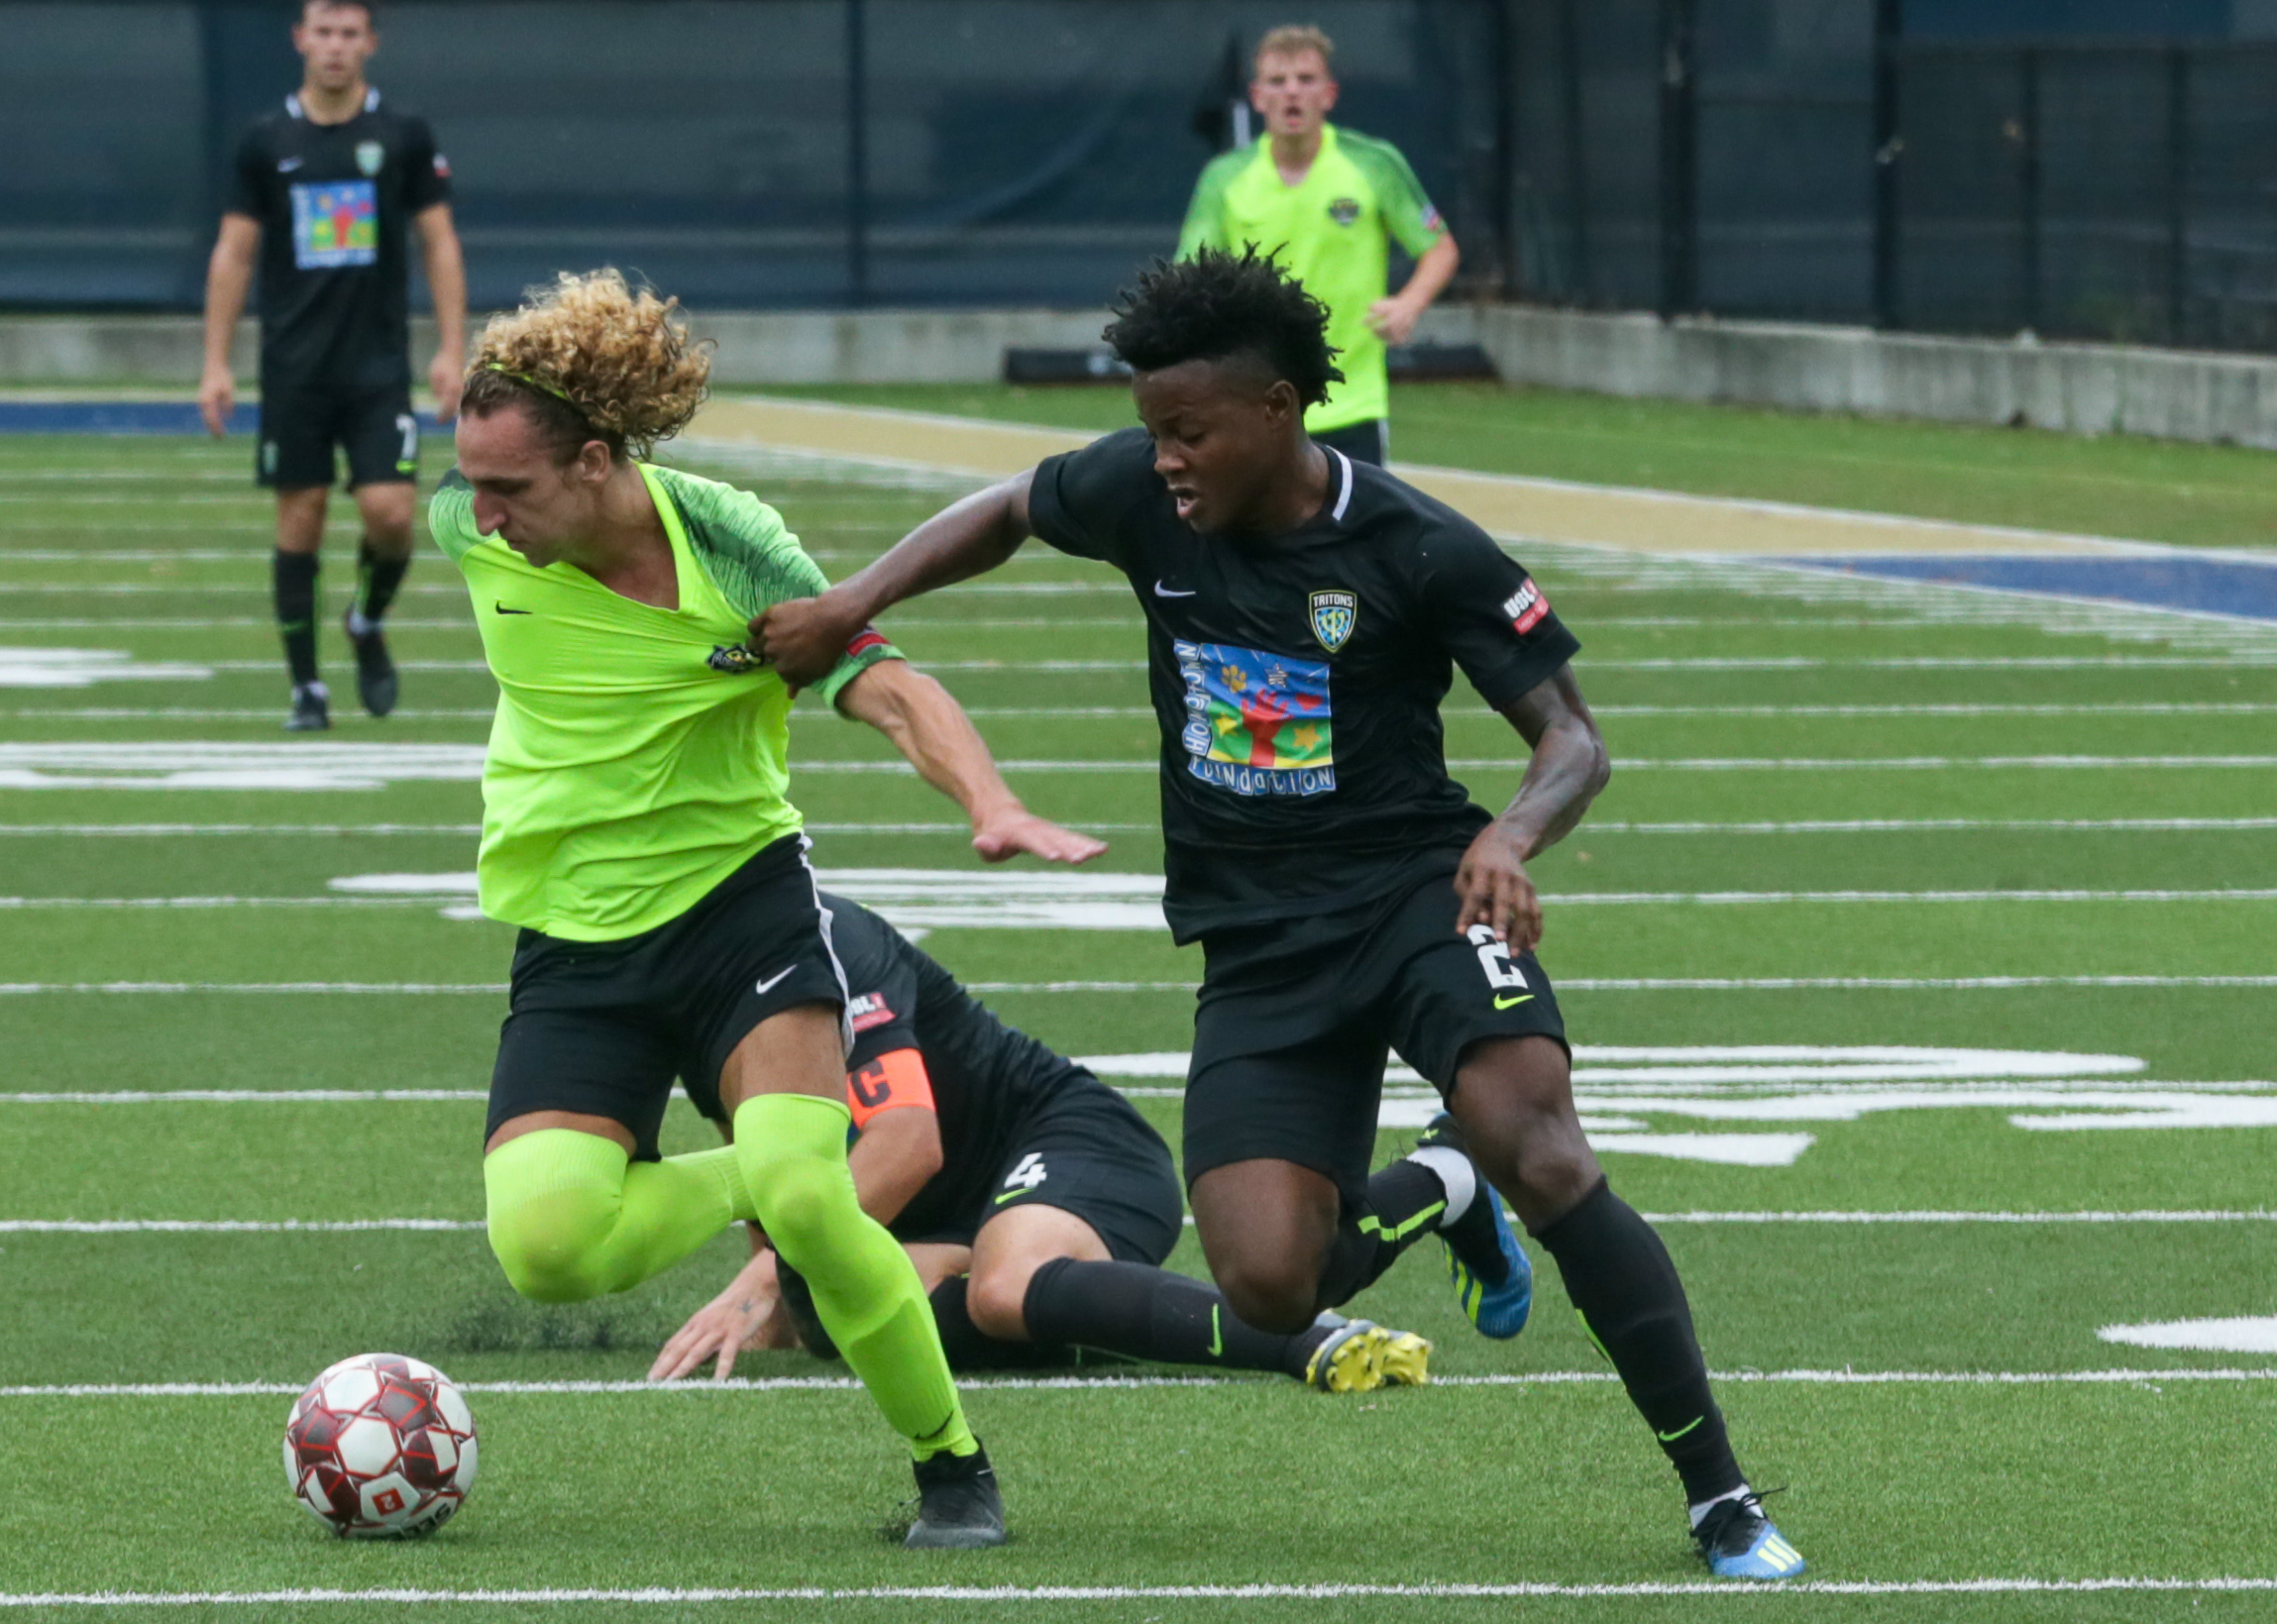 Photos: Florida Elite finishes first USL League Two campaign - Official ...